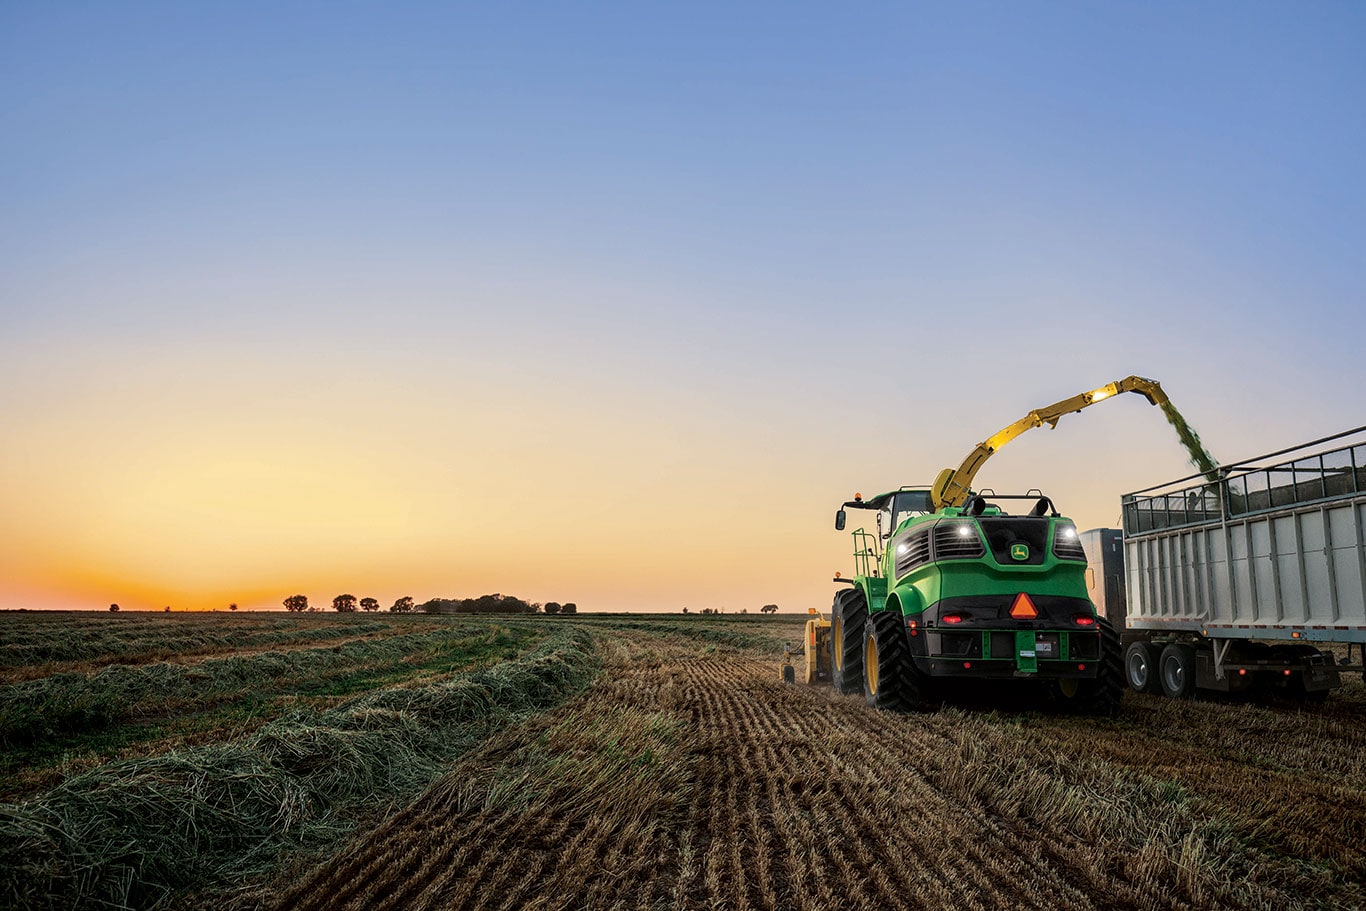 John Deere 9000 Series Self-Propelled Forage Harvesters provide up to 400 tonnes of throughput per hour